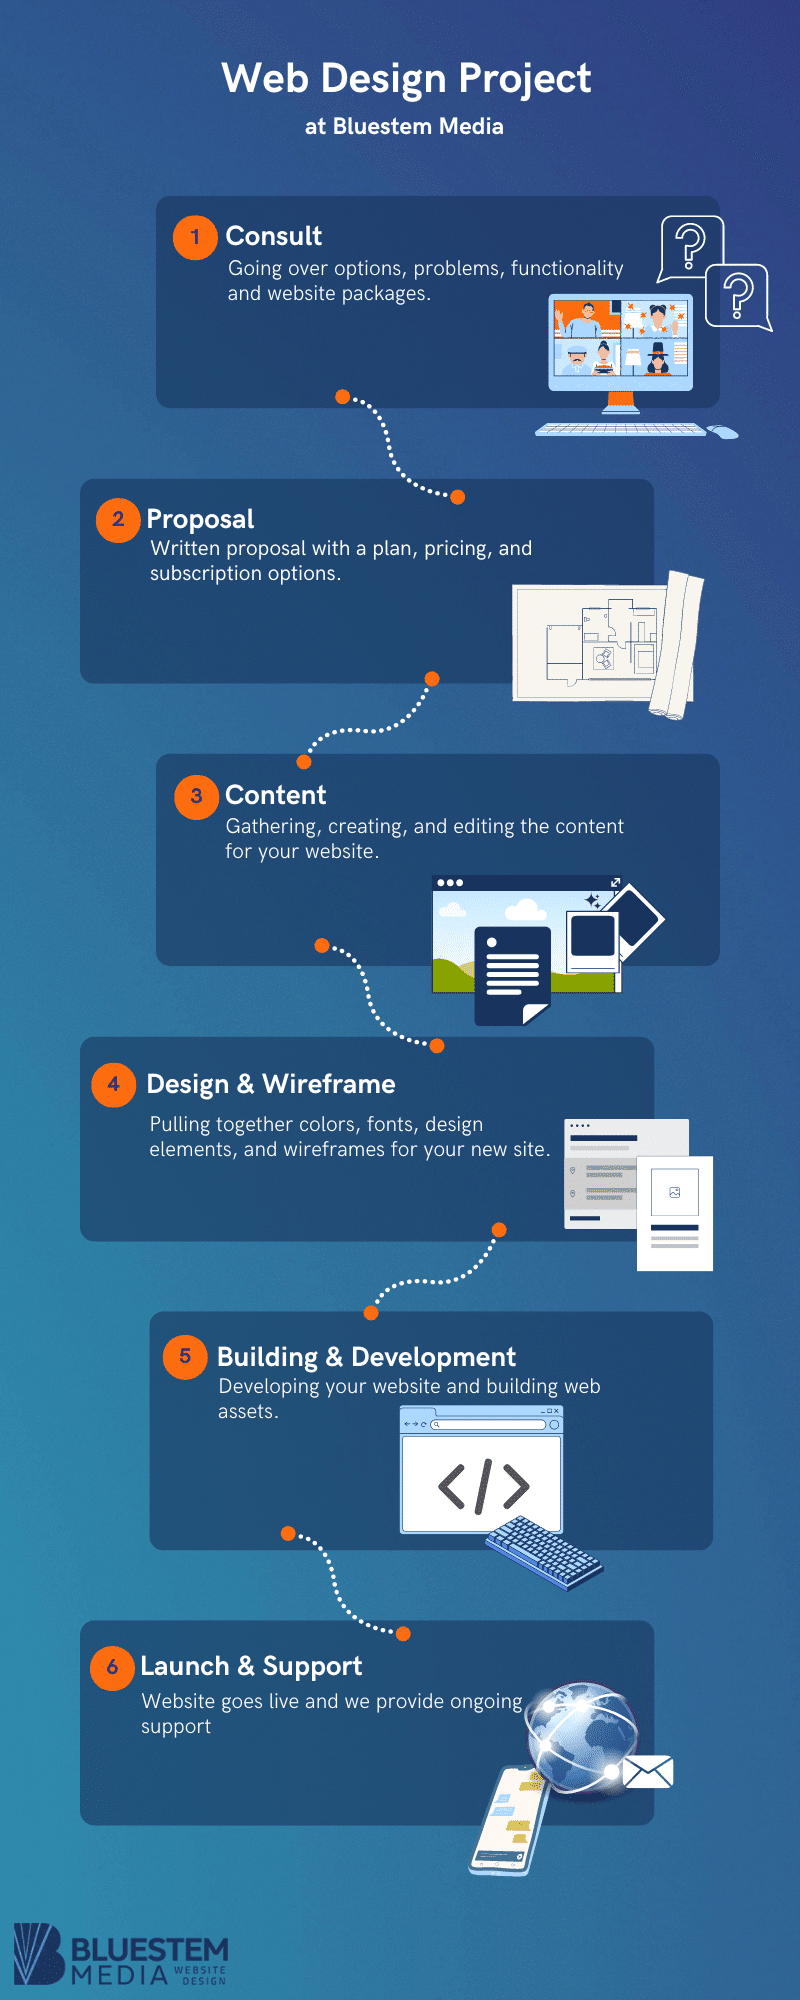 the illustrated process of working on a web design project with Bluestem Media, start to finish